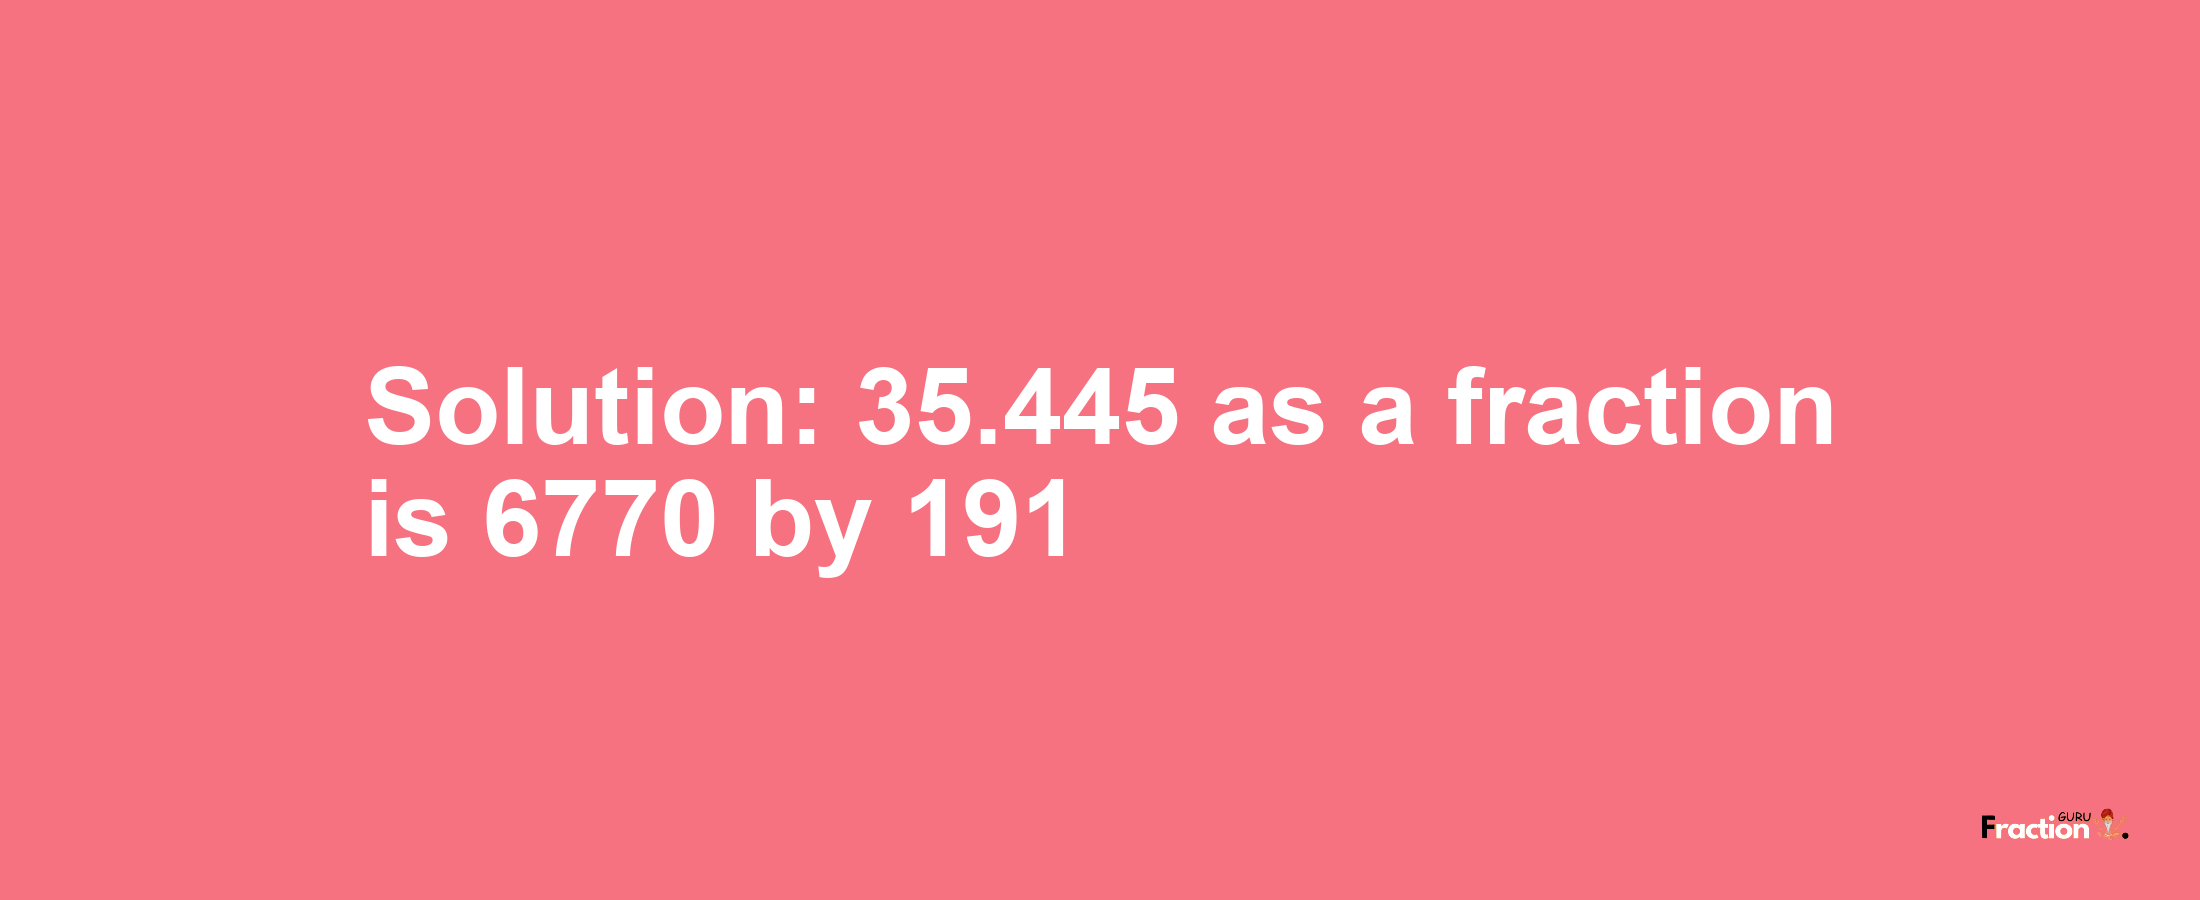 Solution:35.445 as a fraction is 6770/191